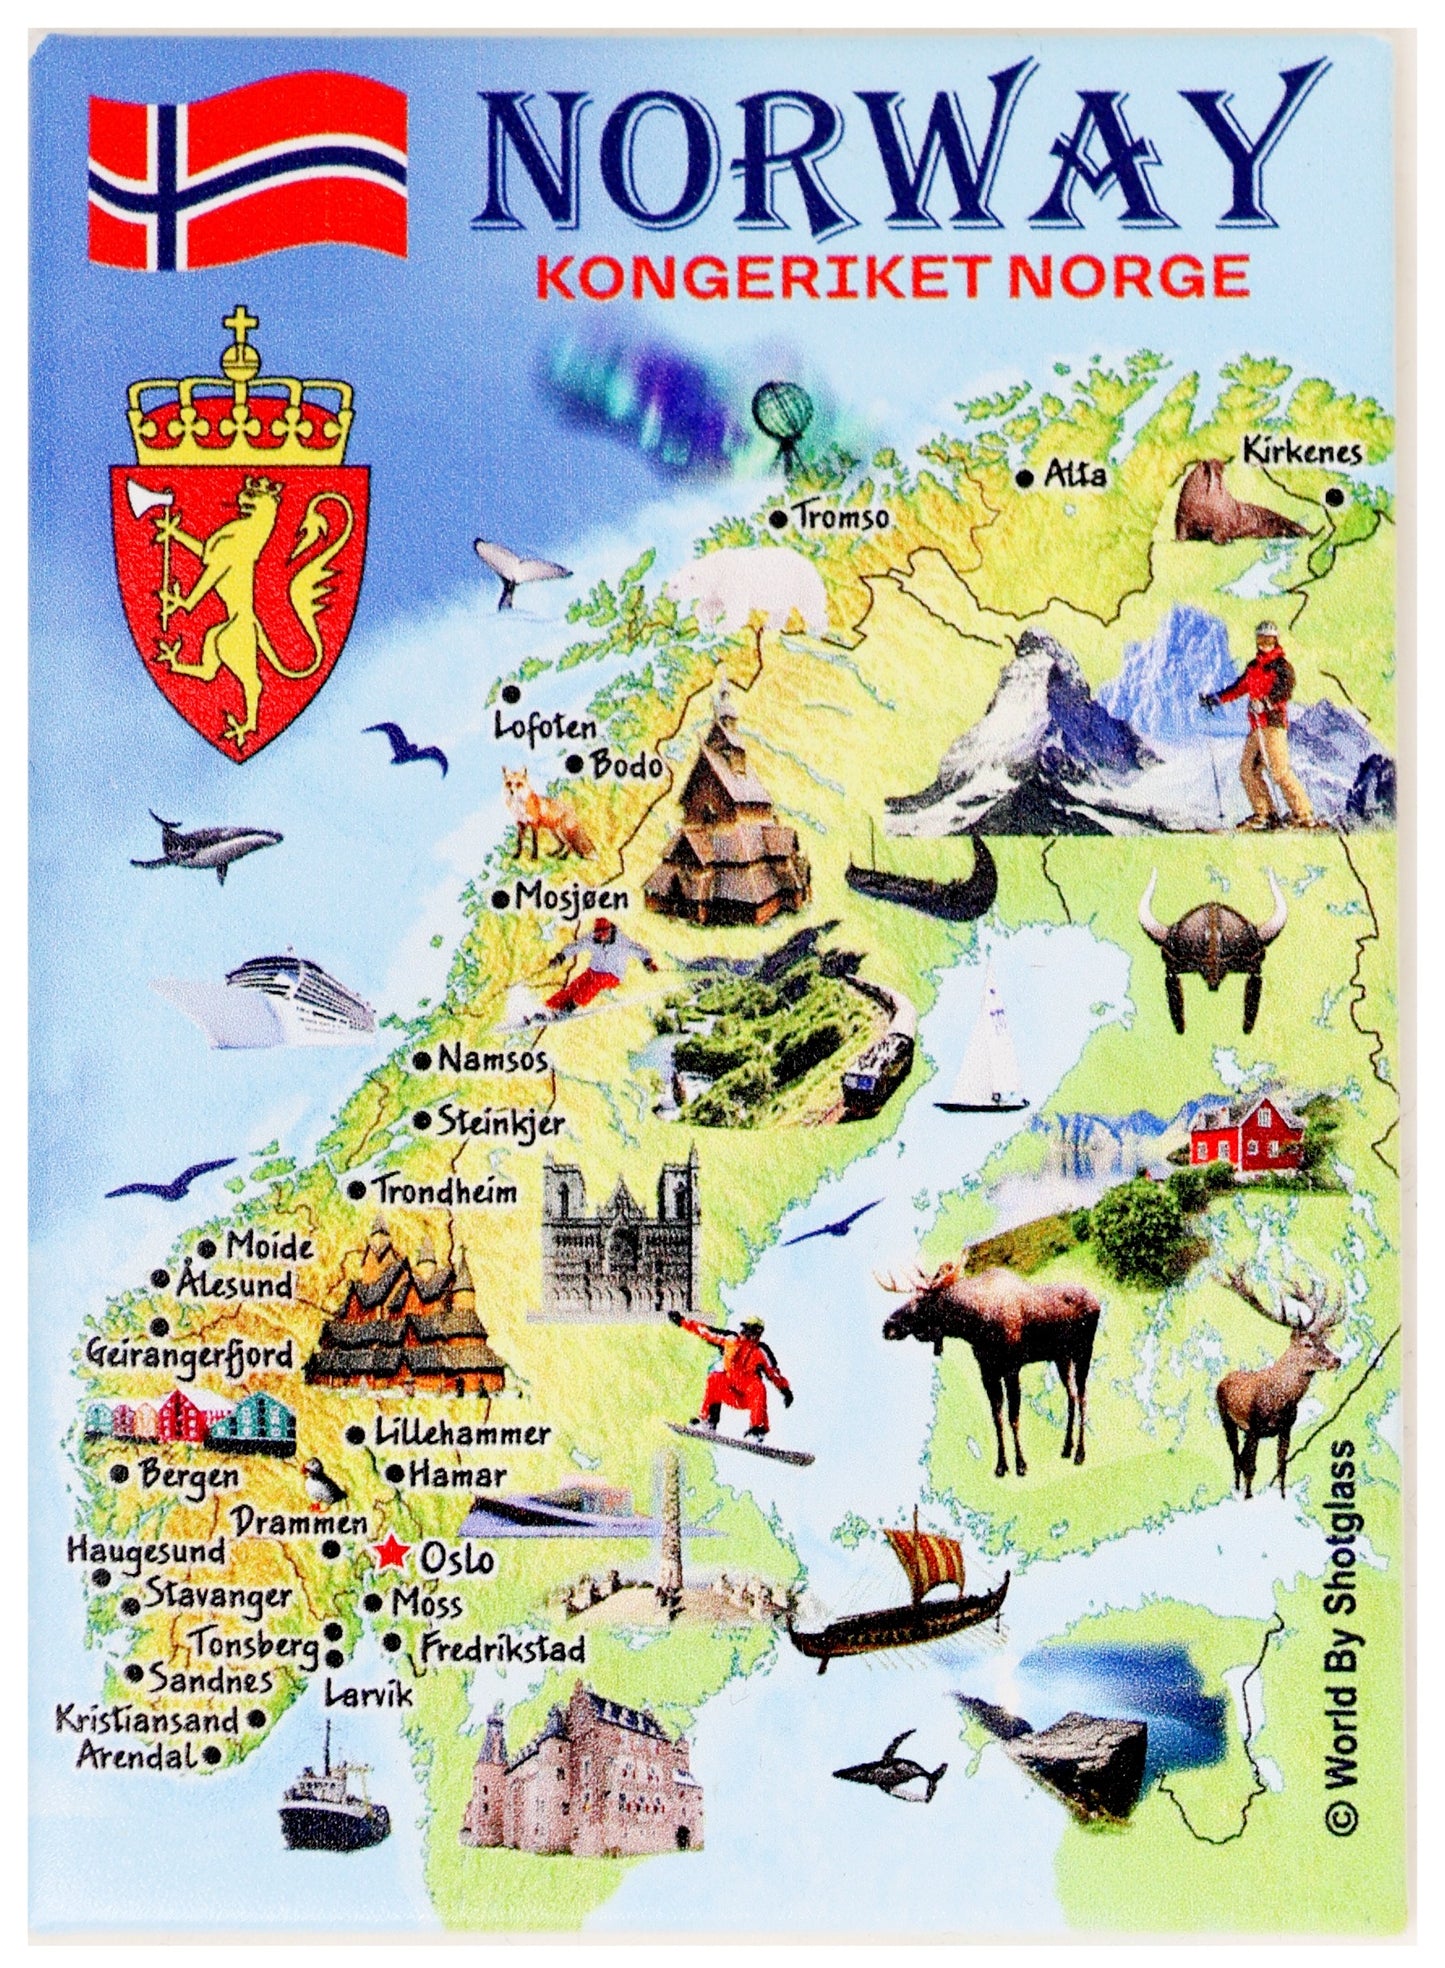 Norway Graphic Map and Attractions Souvenir Fridge Magnet 2.5 X 3.5